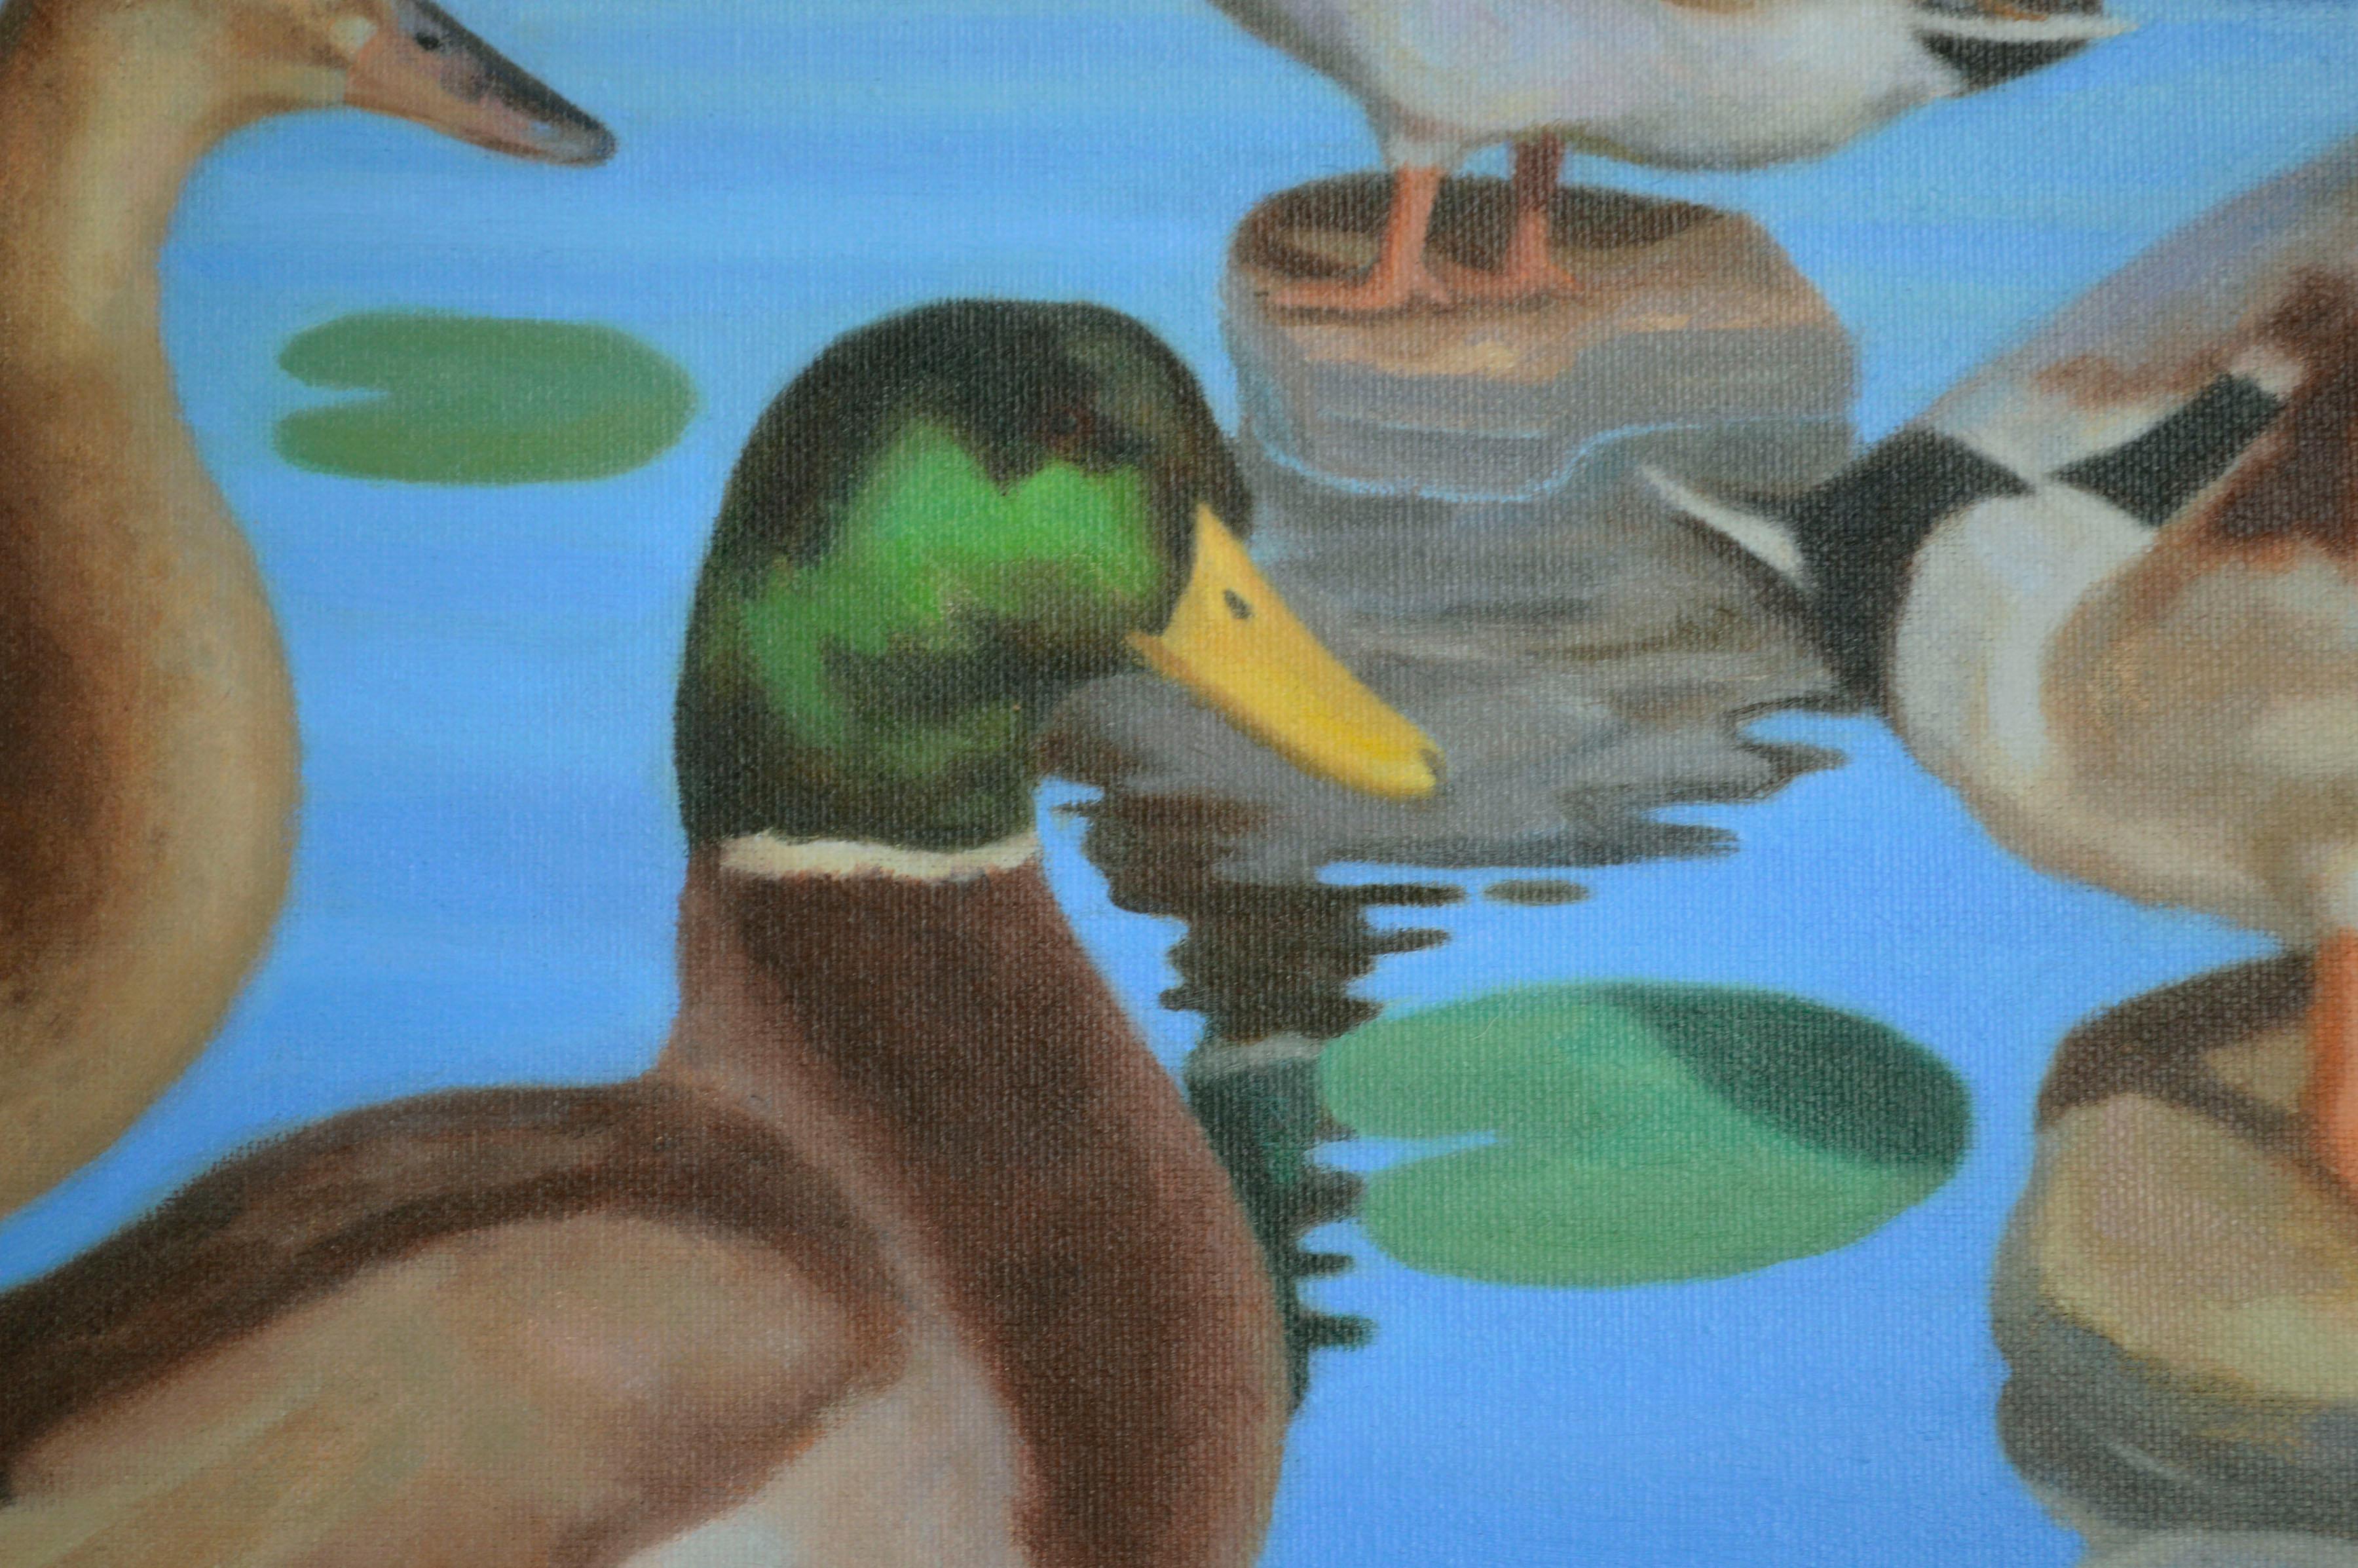 Mallard Ducks in Pond with Lily Pads, Horizontal Landscape  - Blue Animal Painting by Hugh Hendry 